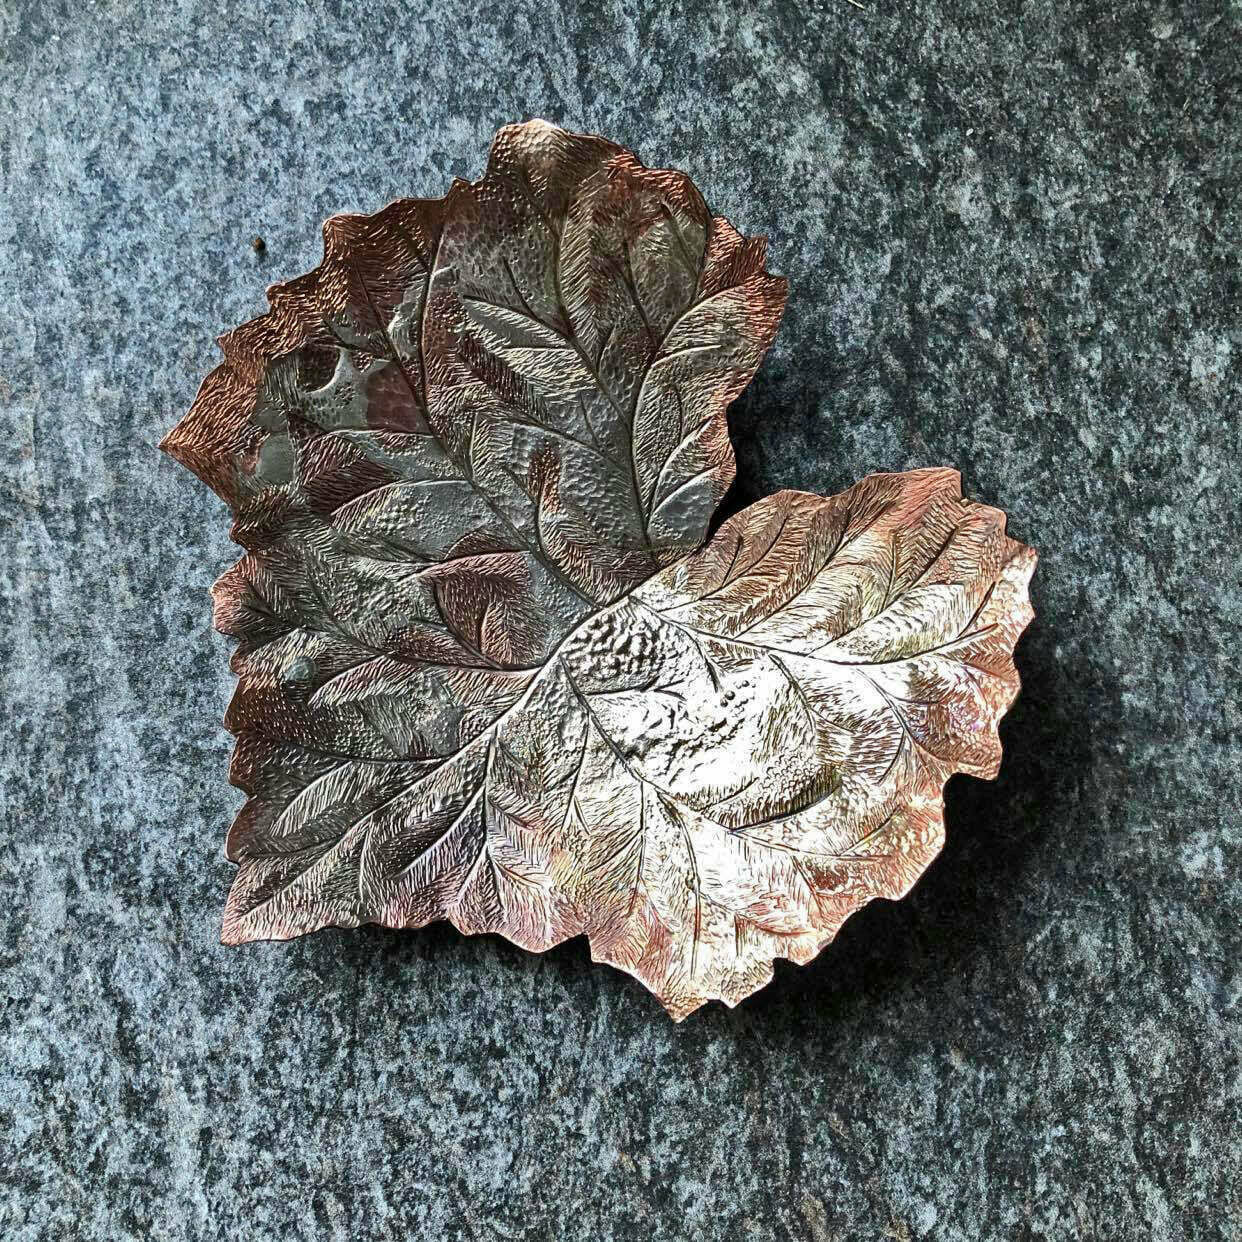 Kingfisher Designs: Large Copper and Silver Leaf Bowl